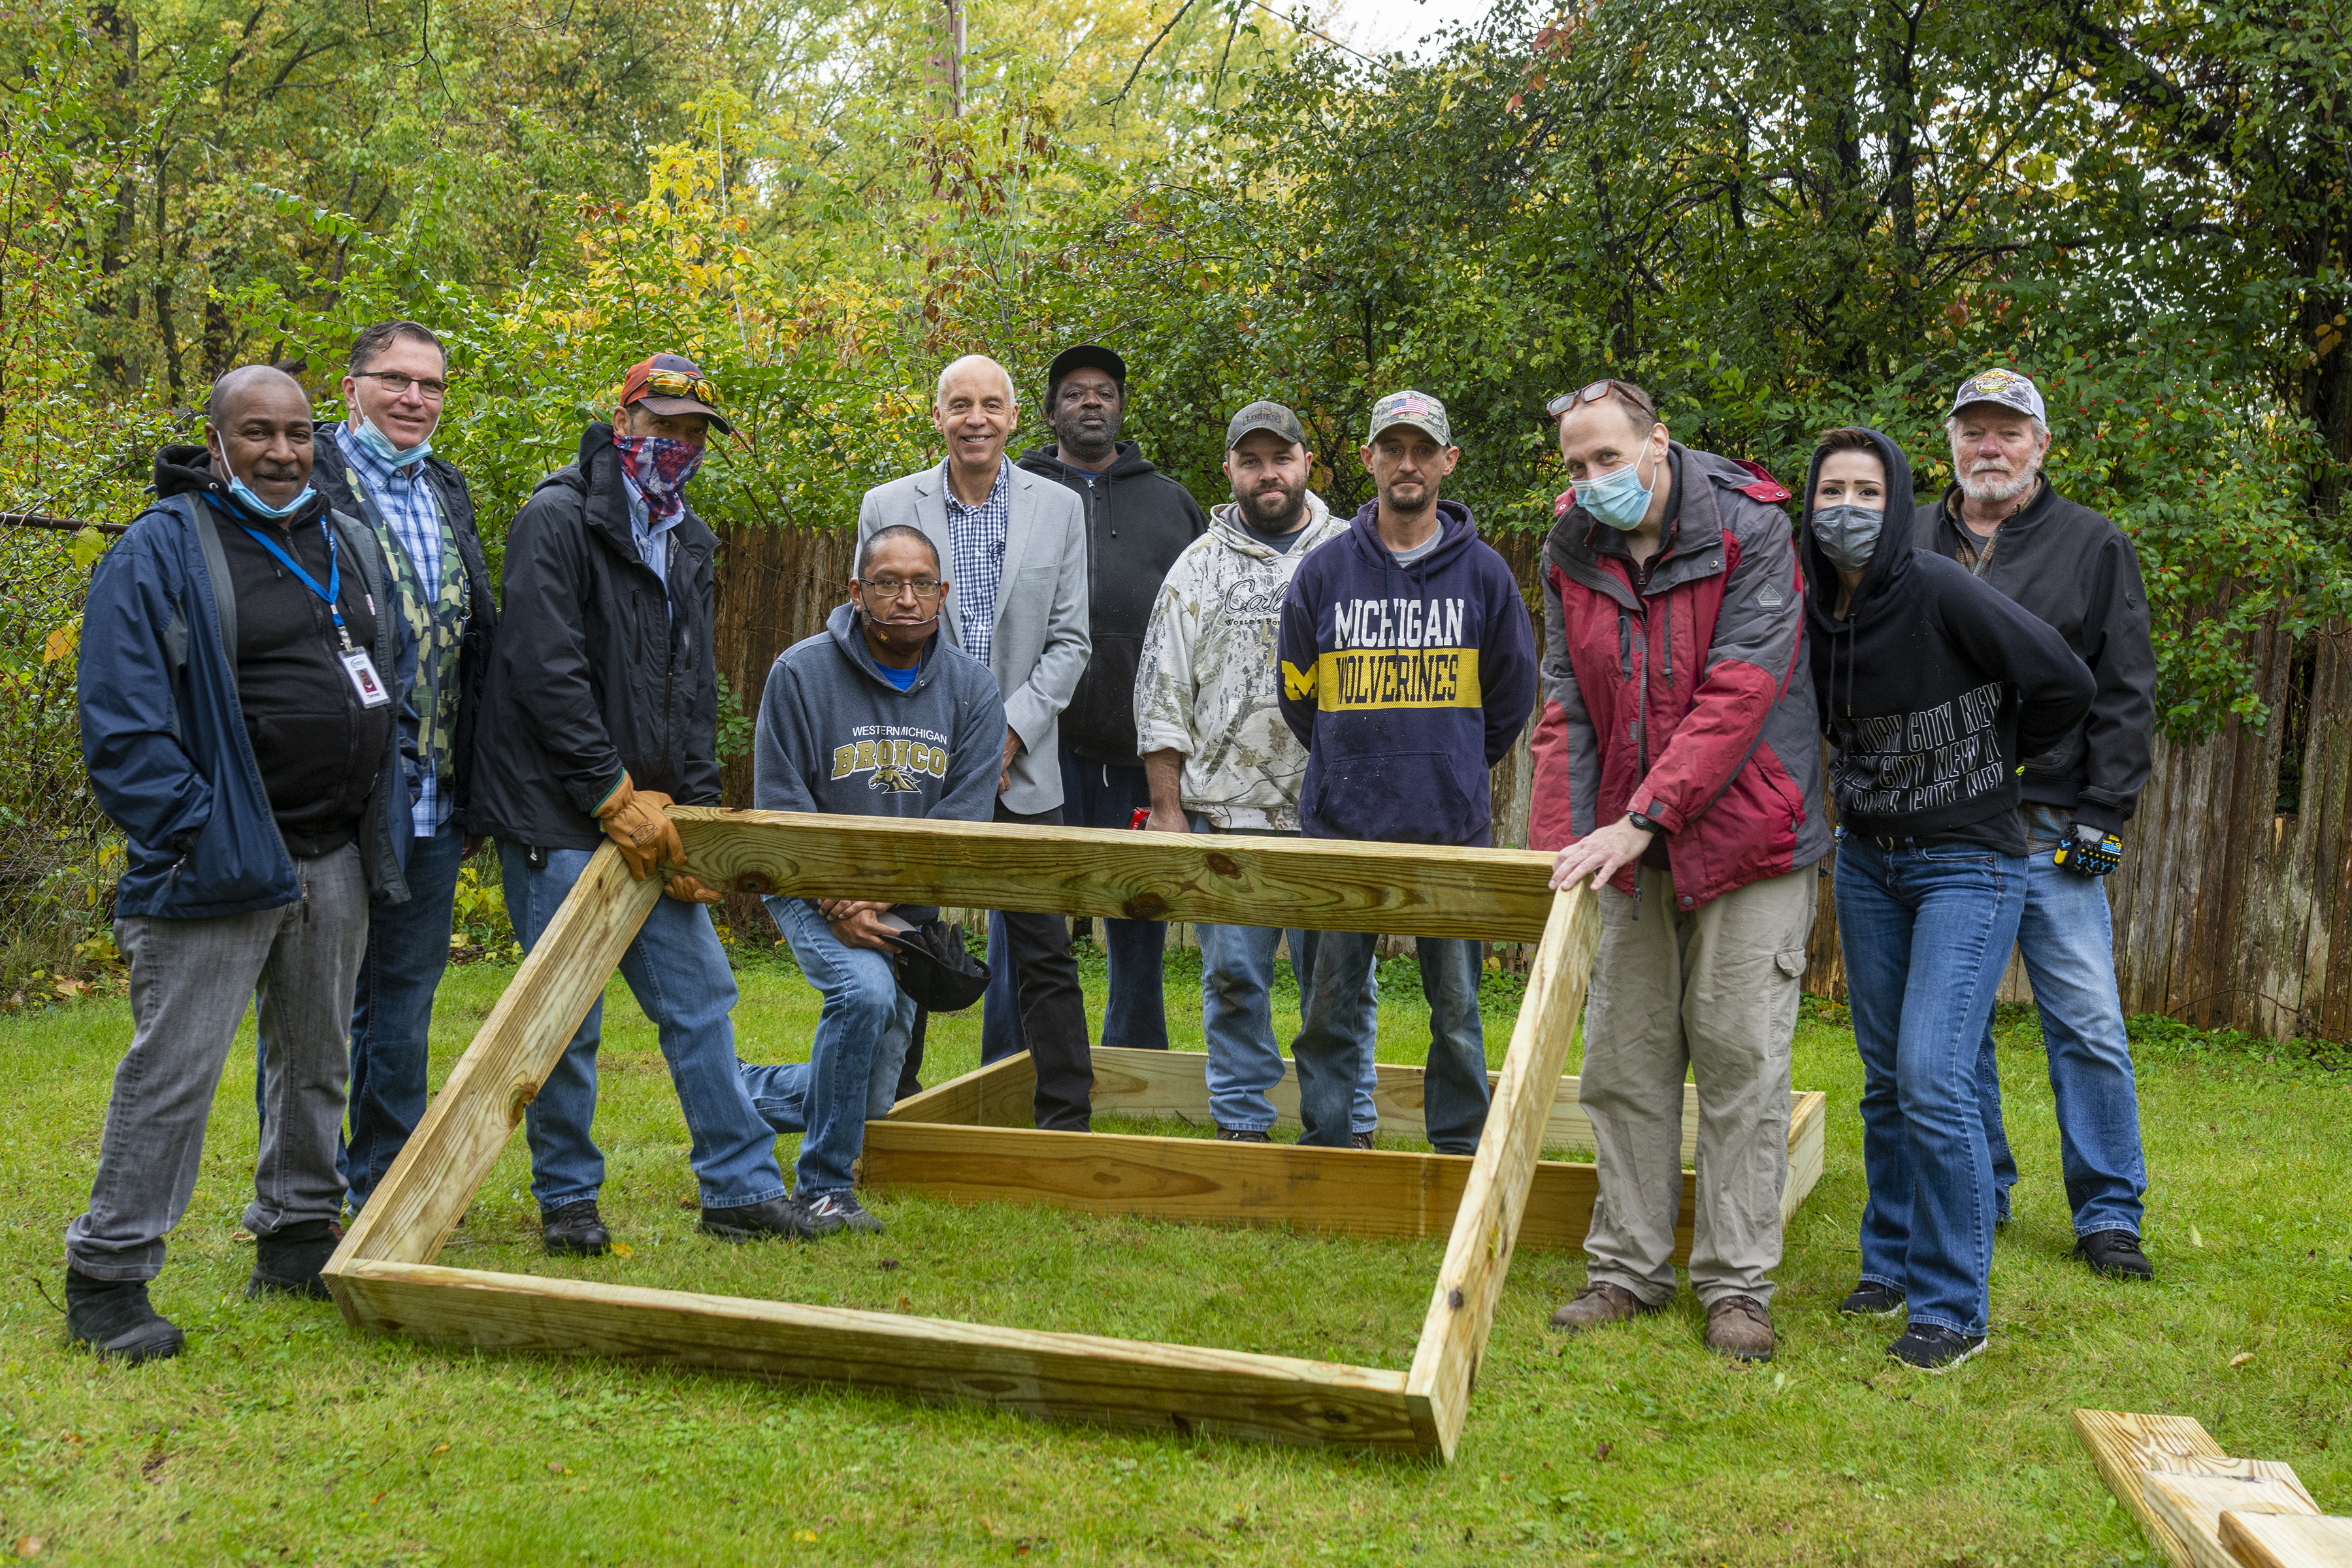 A group of veteran from Keystone house and Lowes posing for a photo while working and make garden beds for Keystone Vets